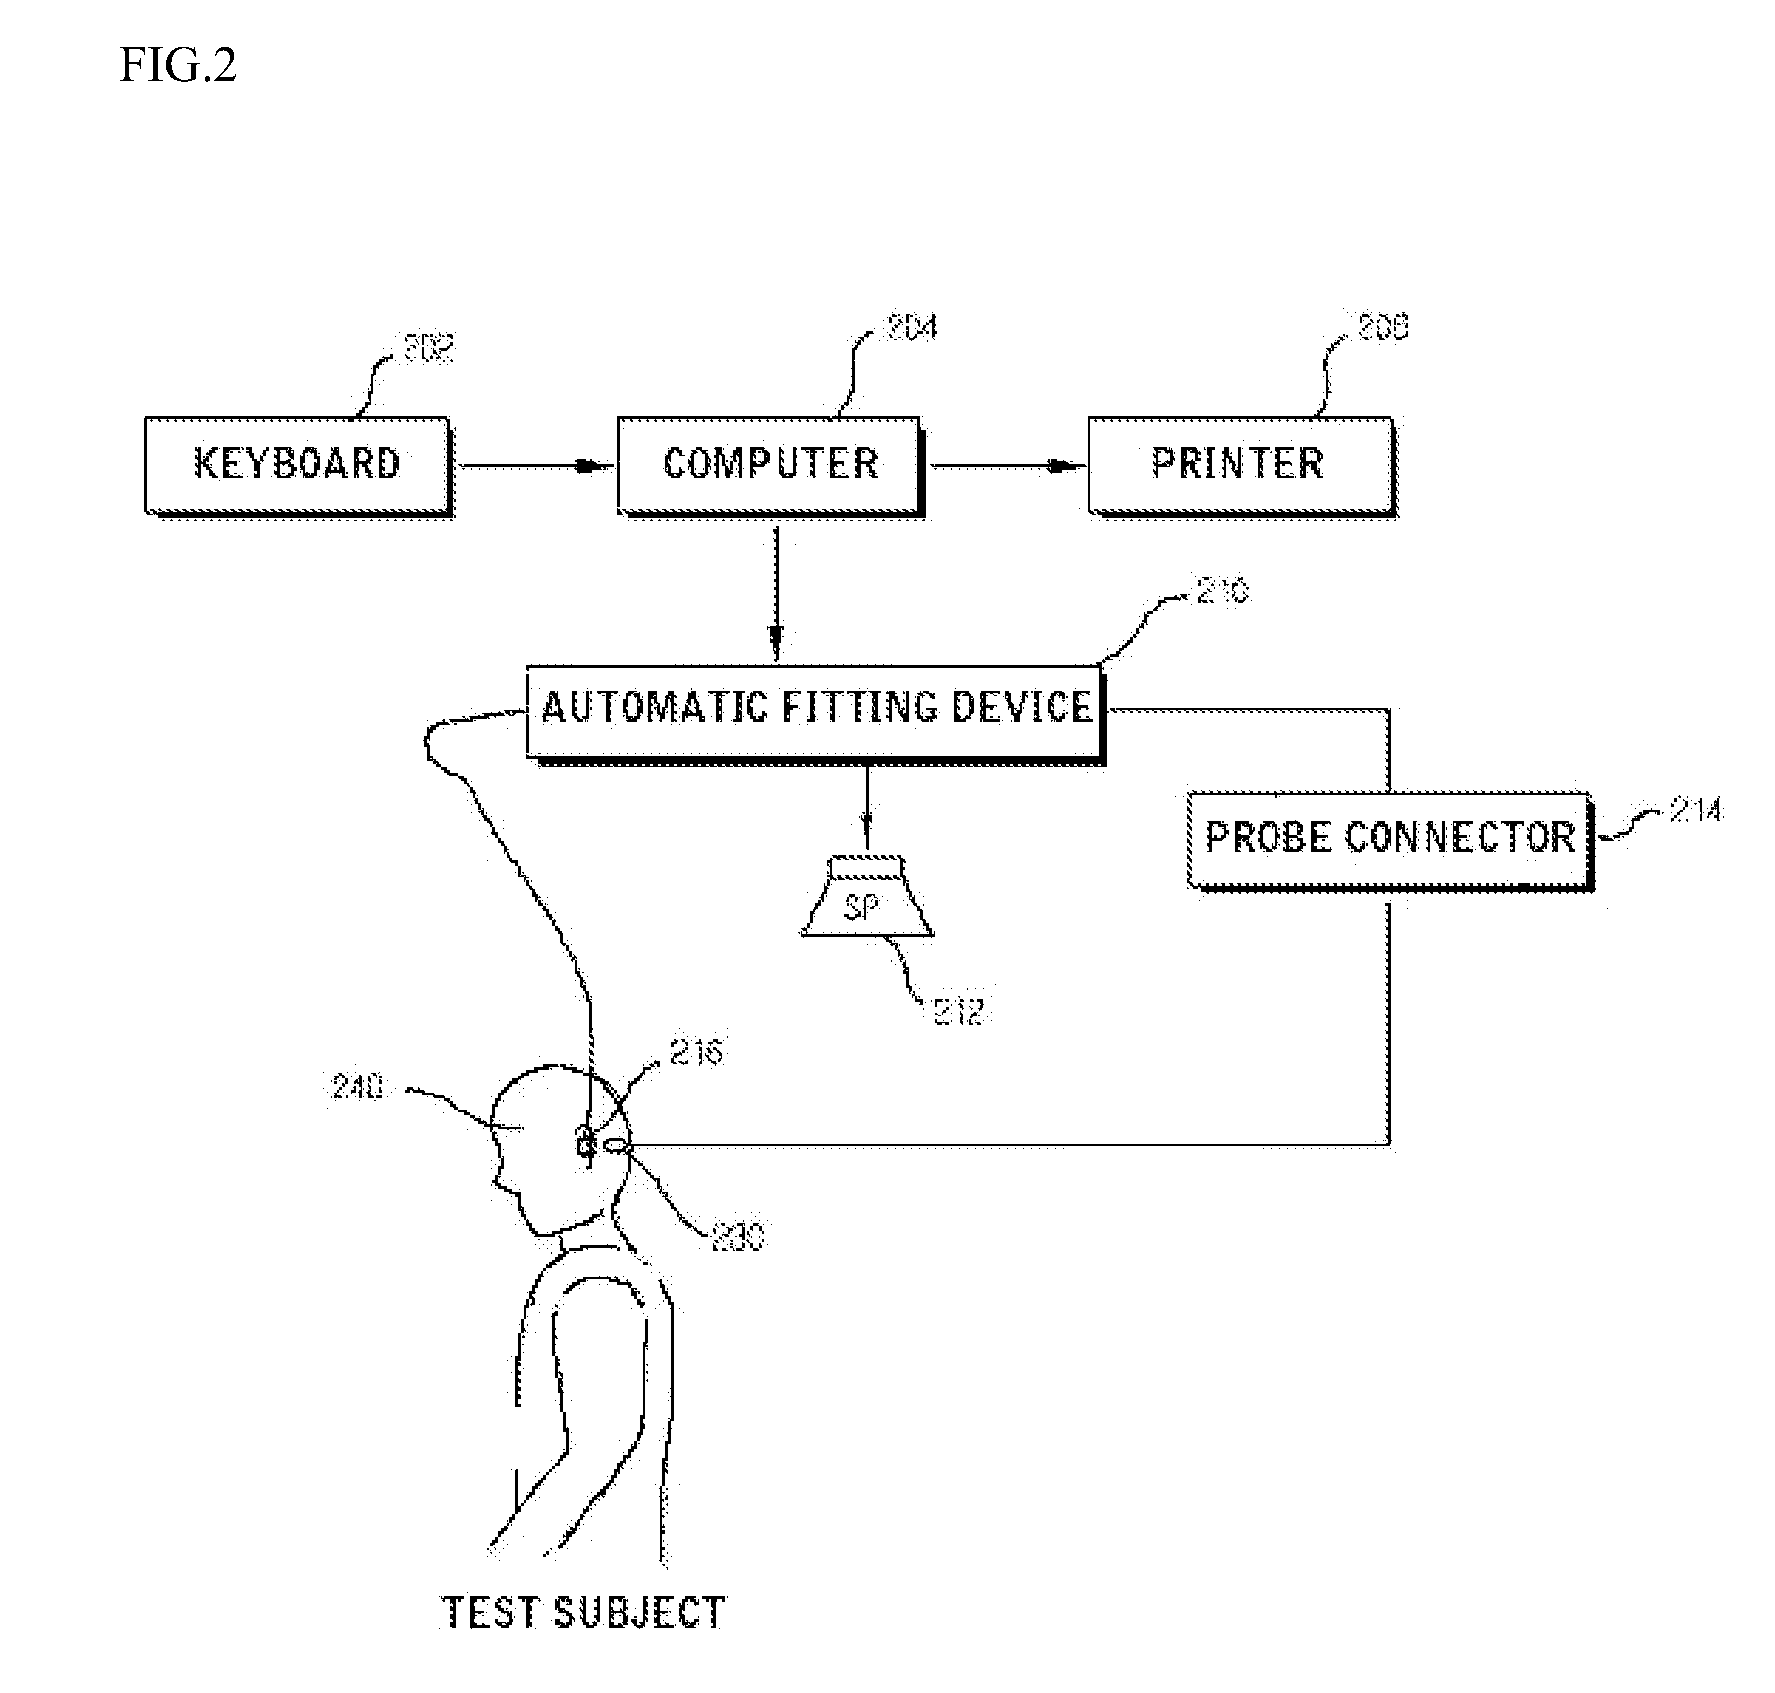 Method of automatically fitting hearing aid